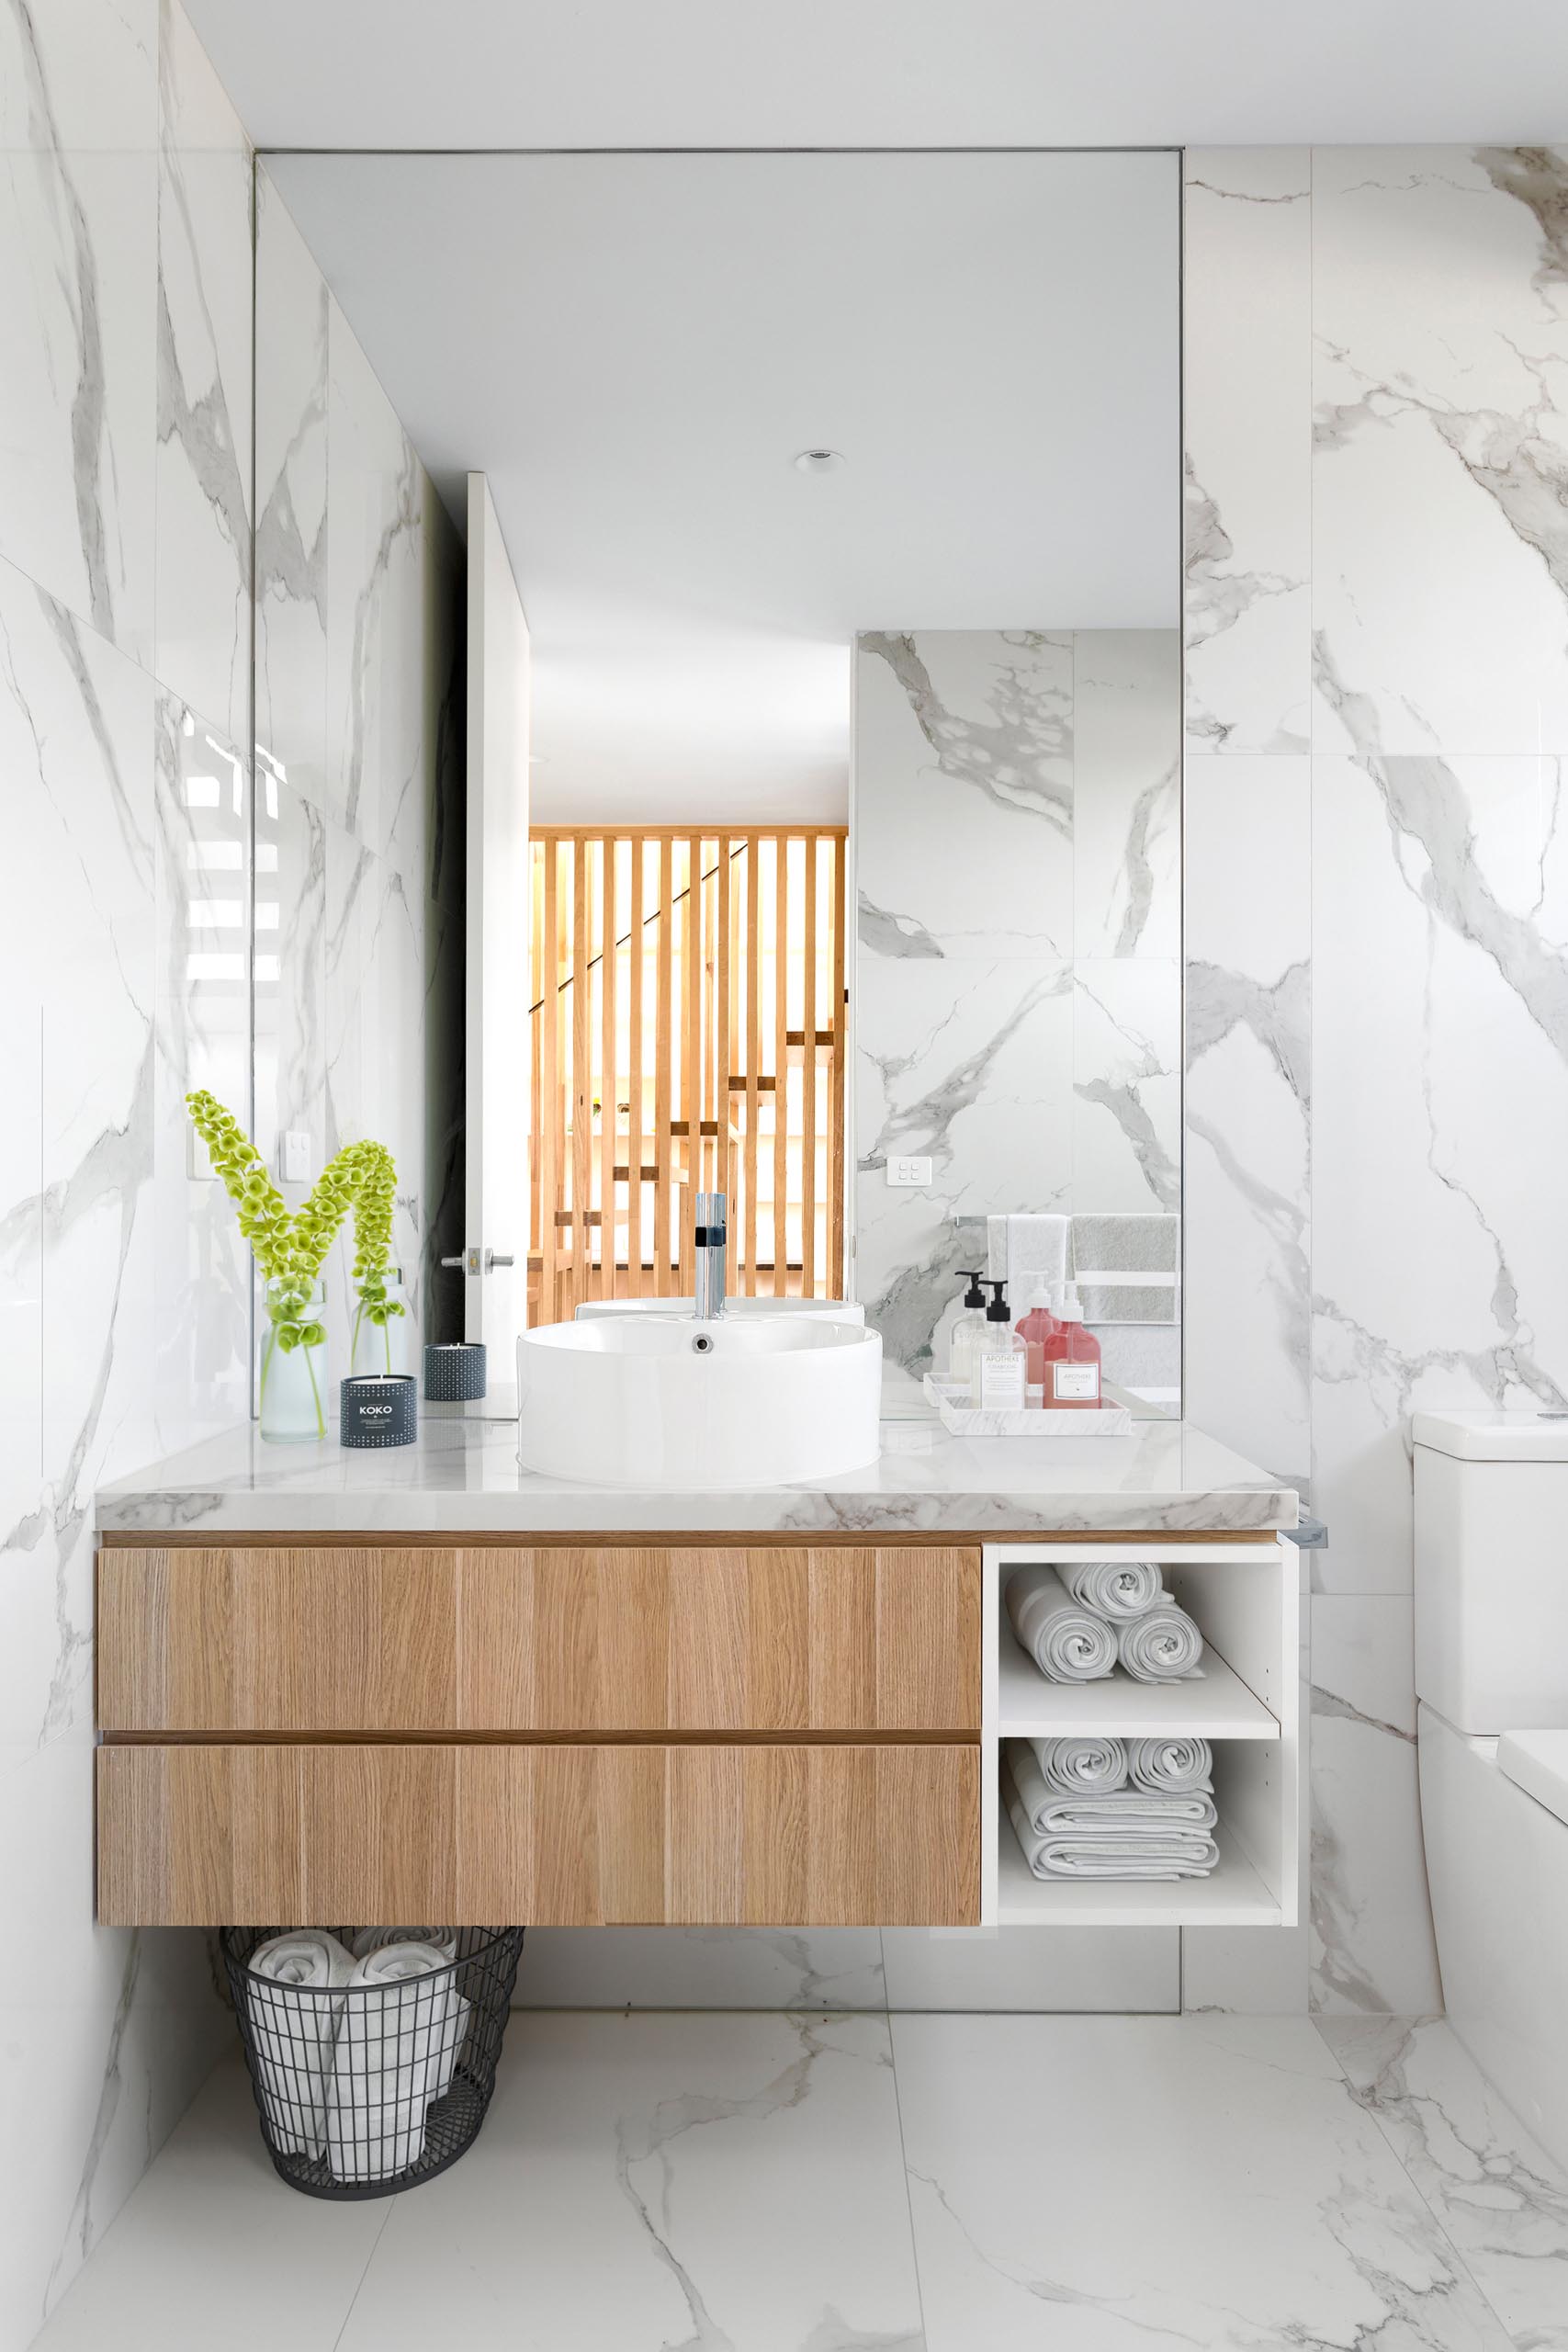 In this modern bathroom, marble tiles cover the walls and floor, while a wood vanity adds a natural element.